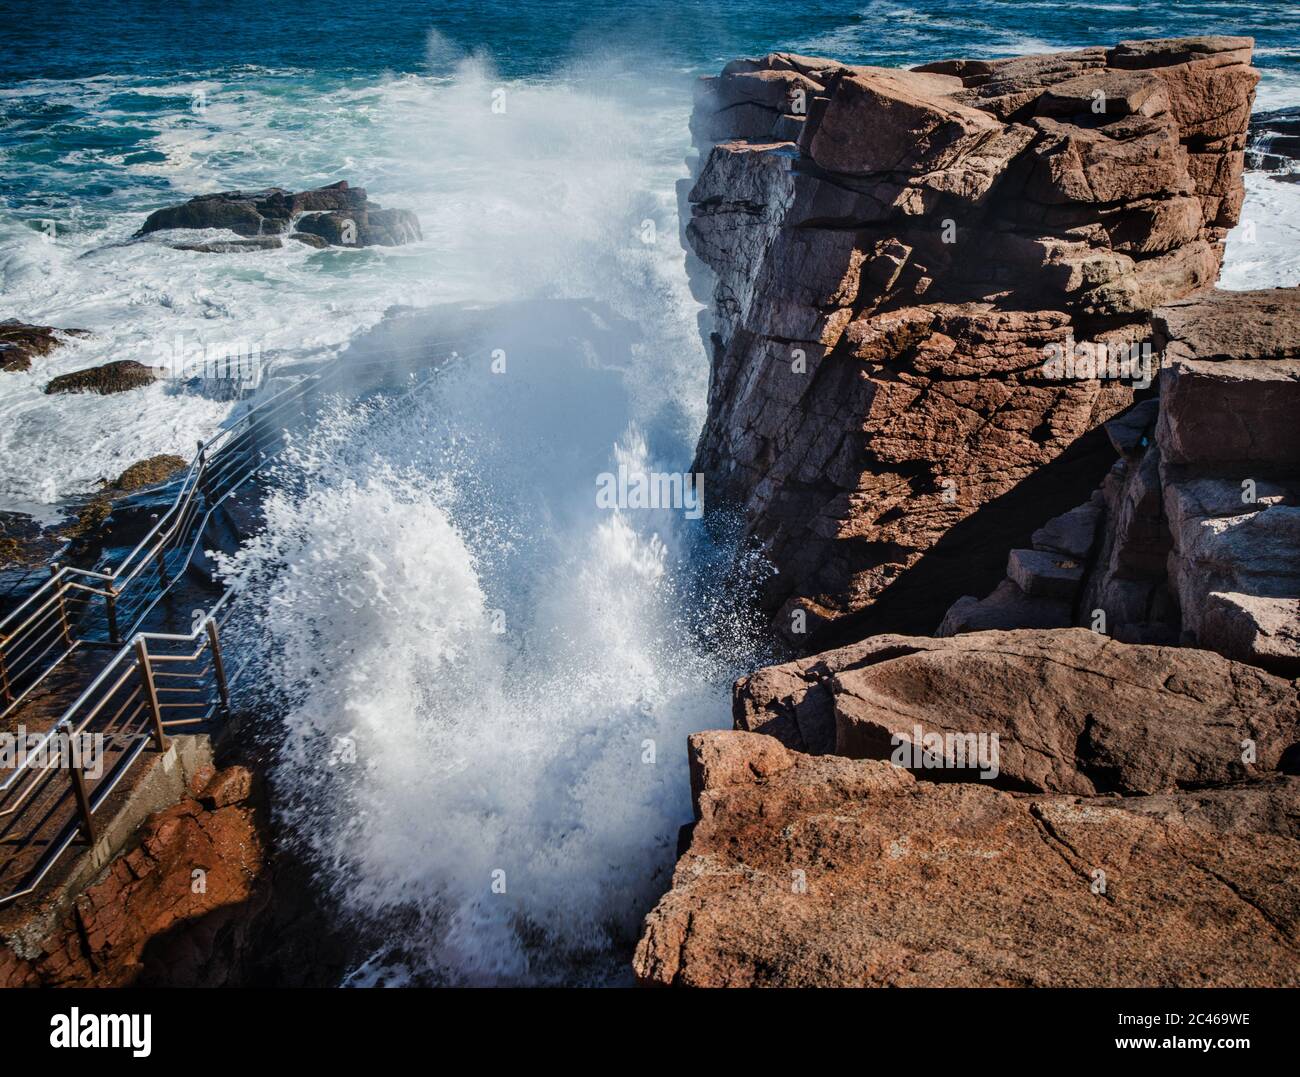 Thunder Hole, a small inlet, naturally carved out of the rocks, where the waves roll into, Acadia National Park, Maine, United States, North America Stock Photo